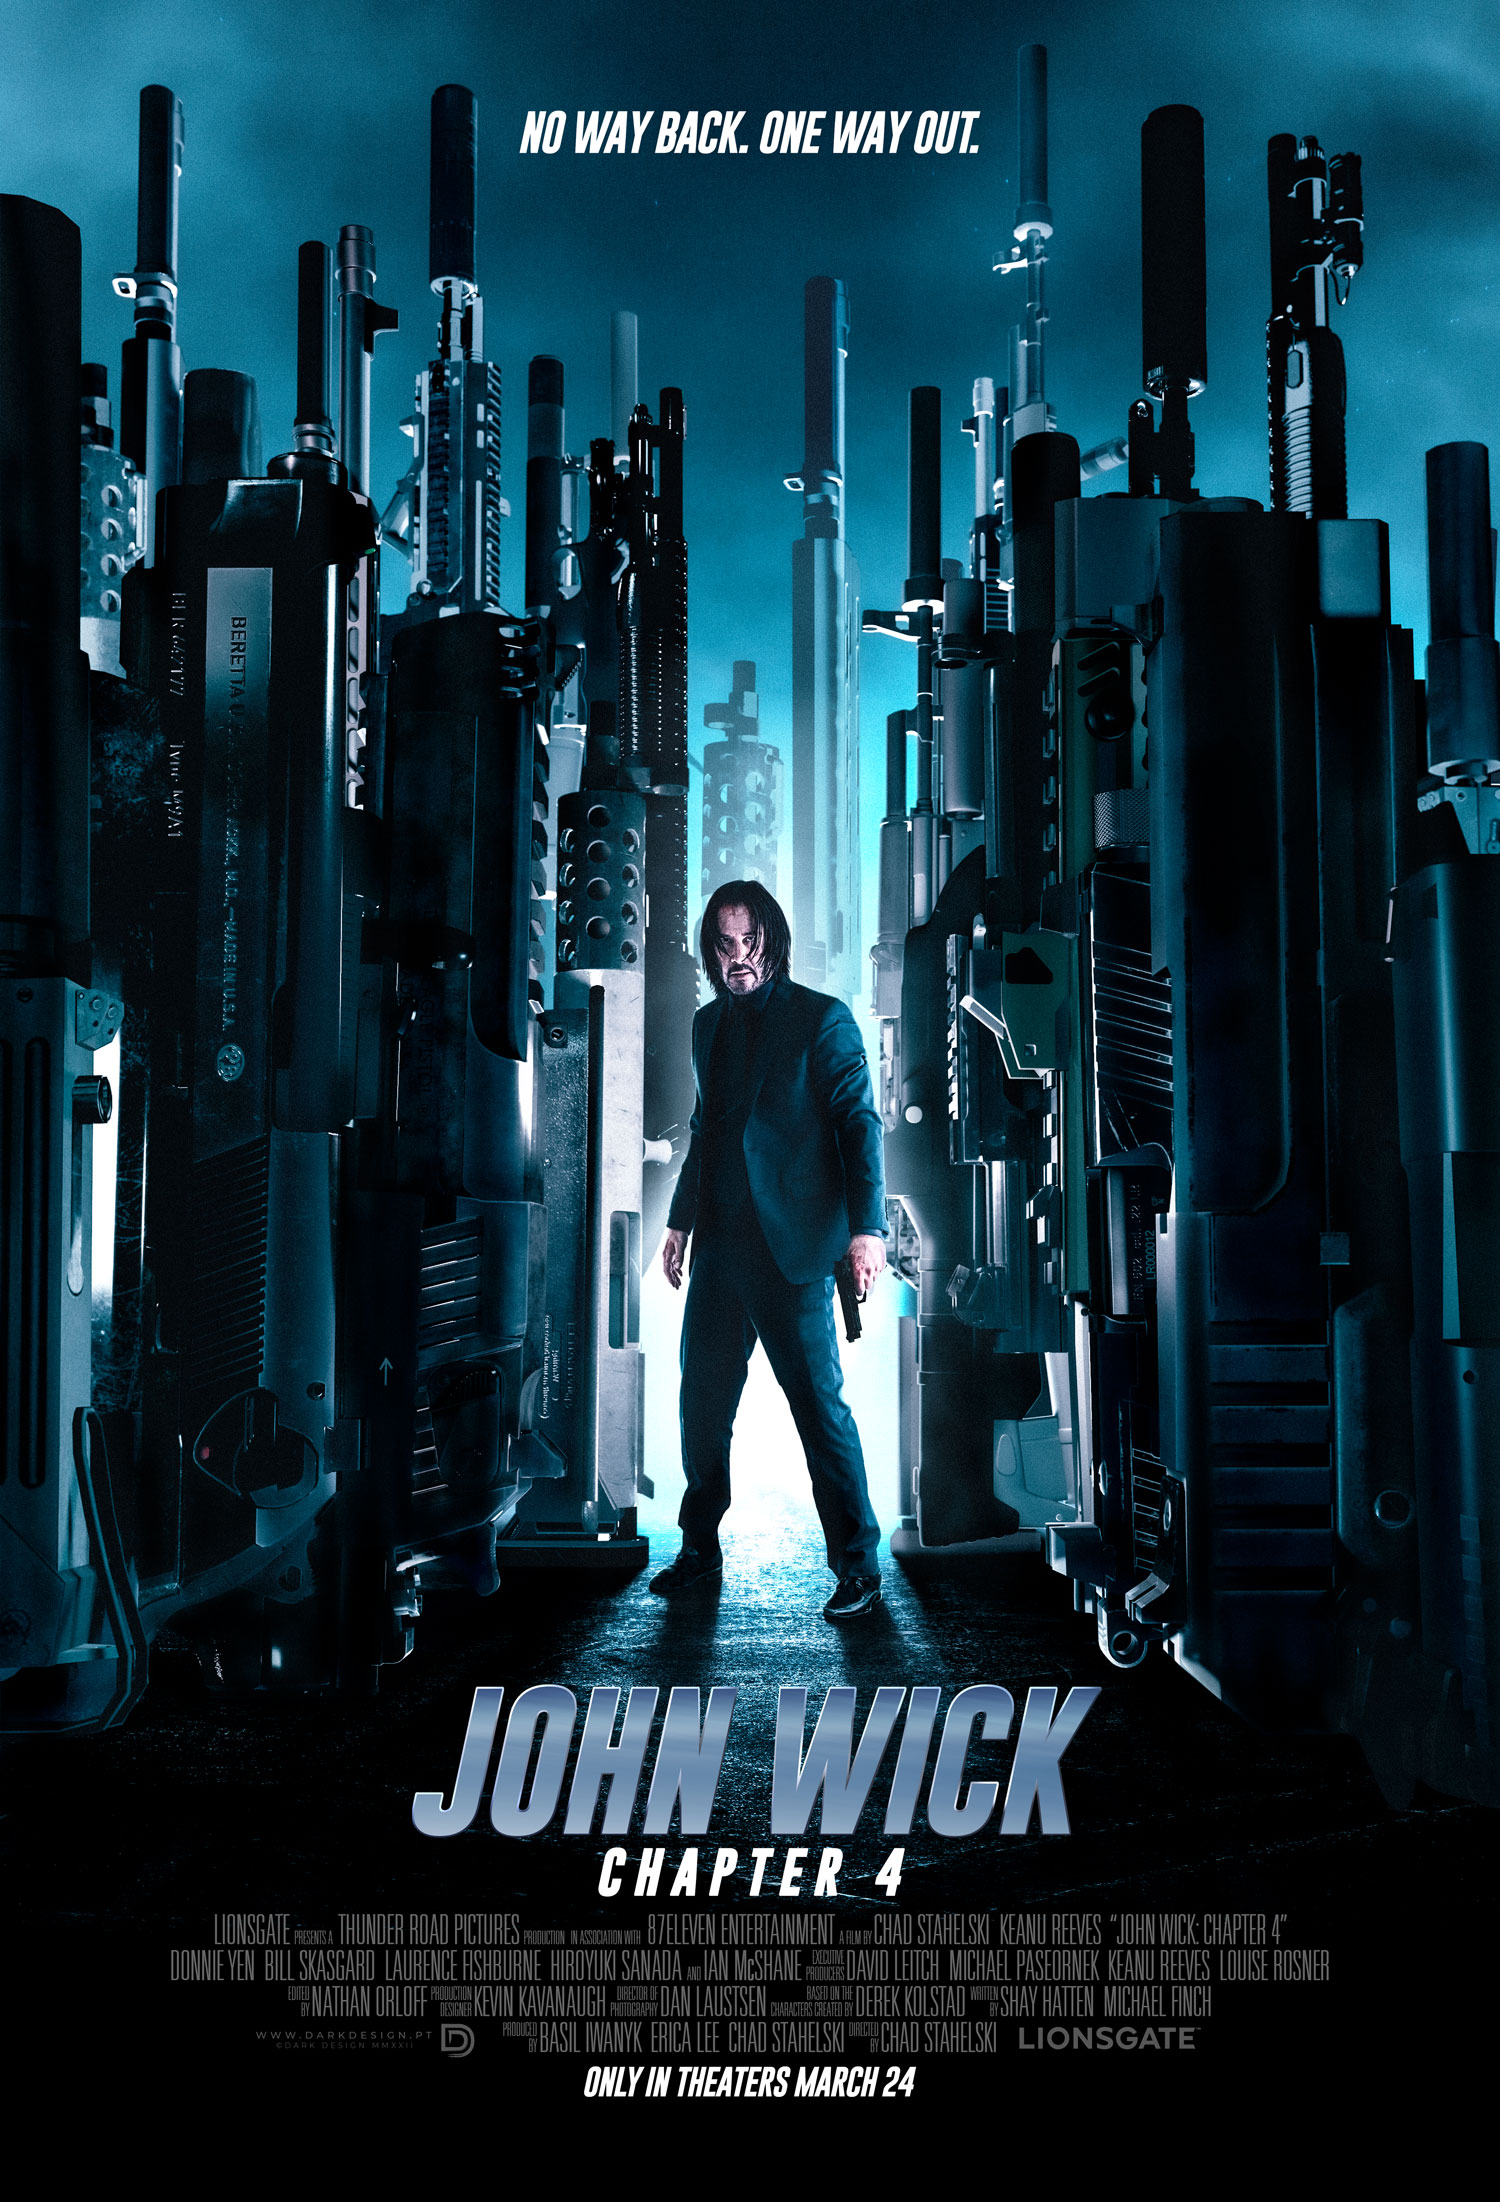 Movie Poster: John Wick: Chapter 4